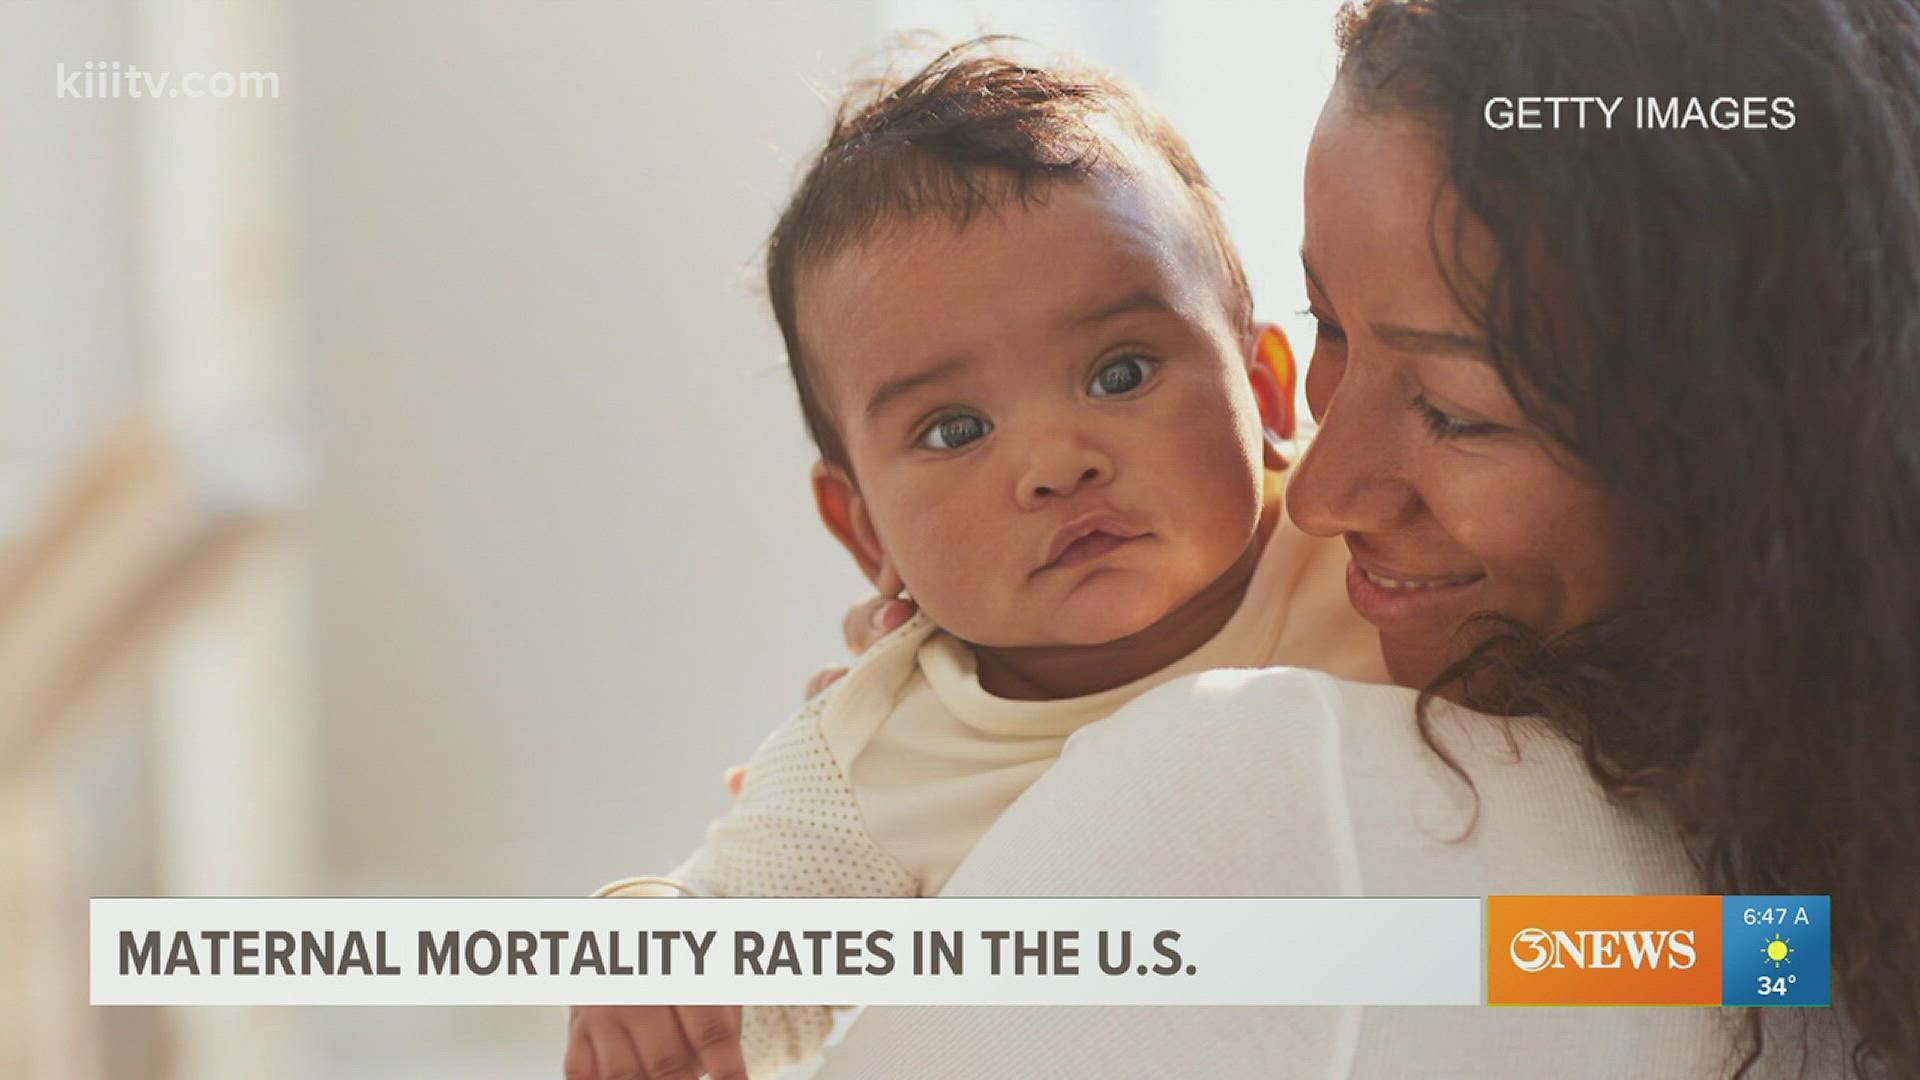 The mortality rate for non-hispanic black women was almost three times higher than the rate for non-hispanic white women according to the CDC.